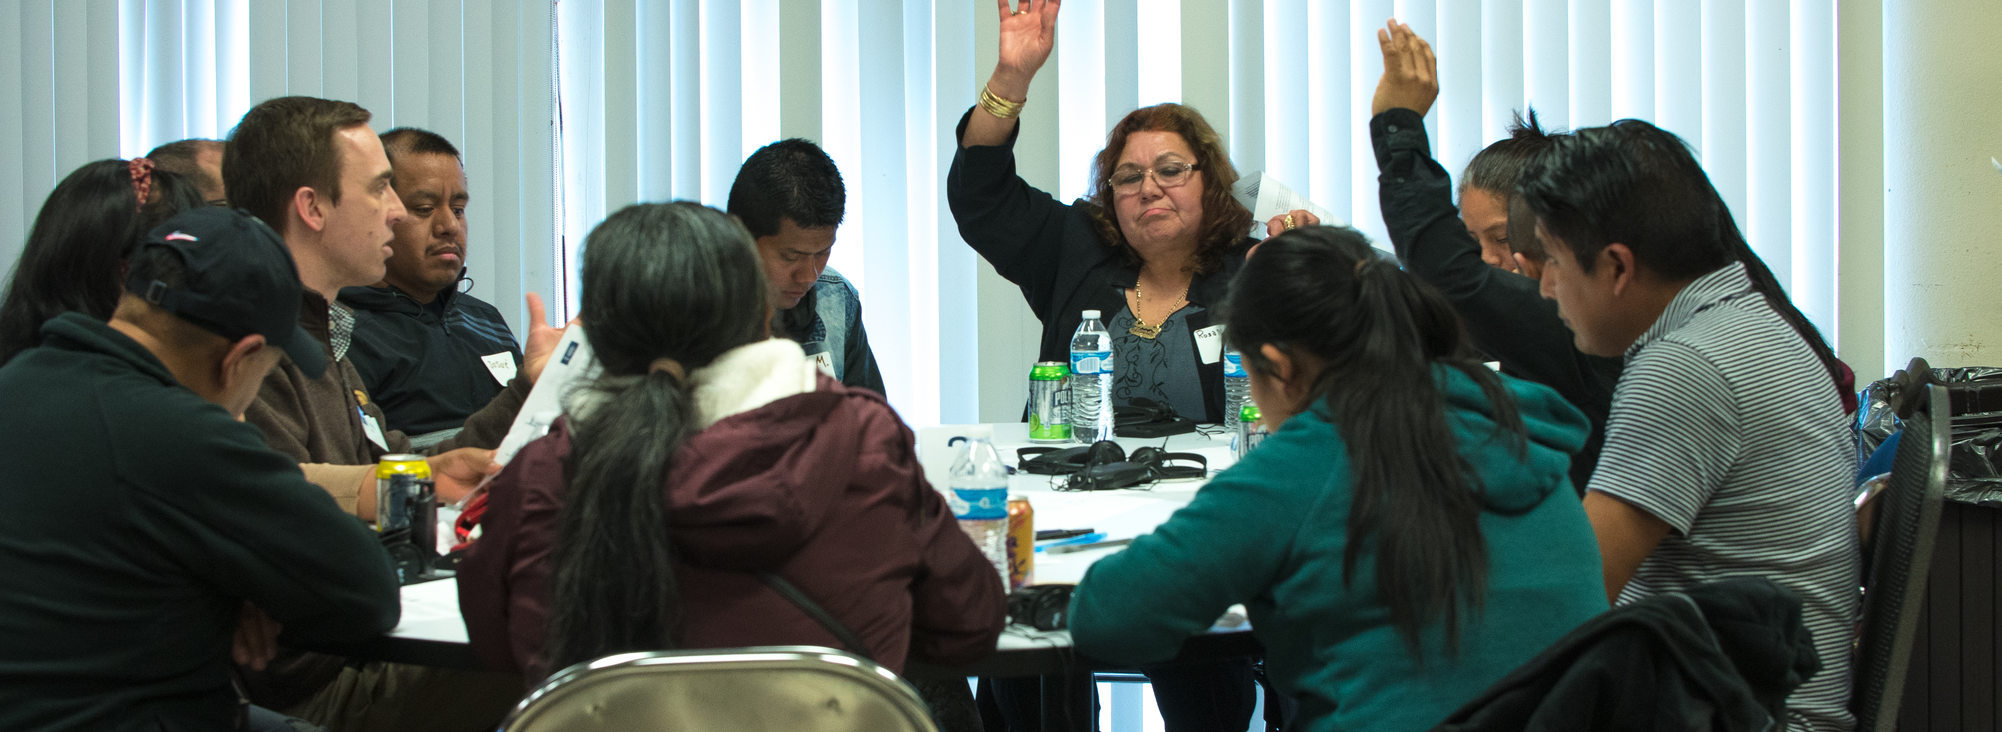 people raise their hands to vote on topics during a roundtable discussion at a community workshop